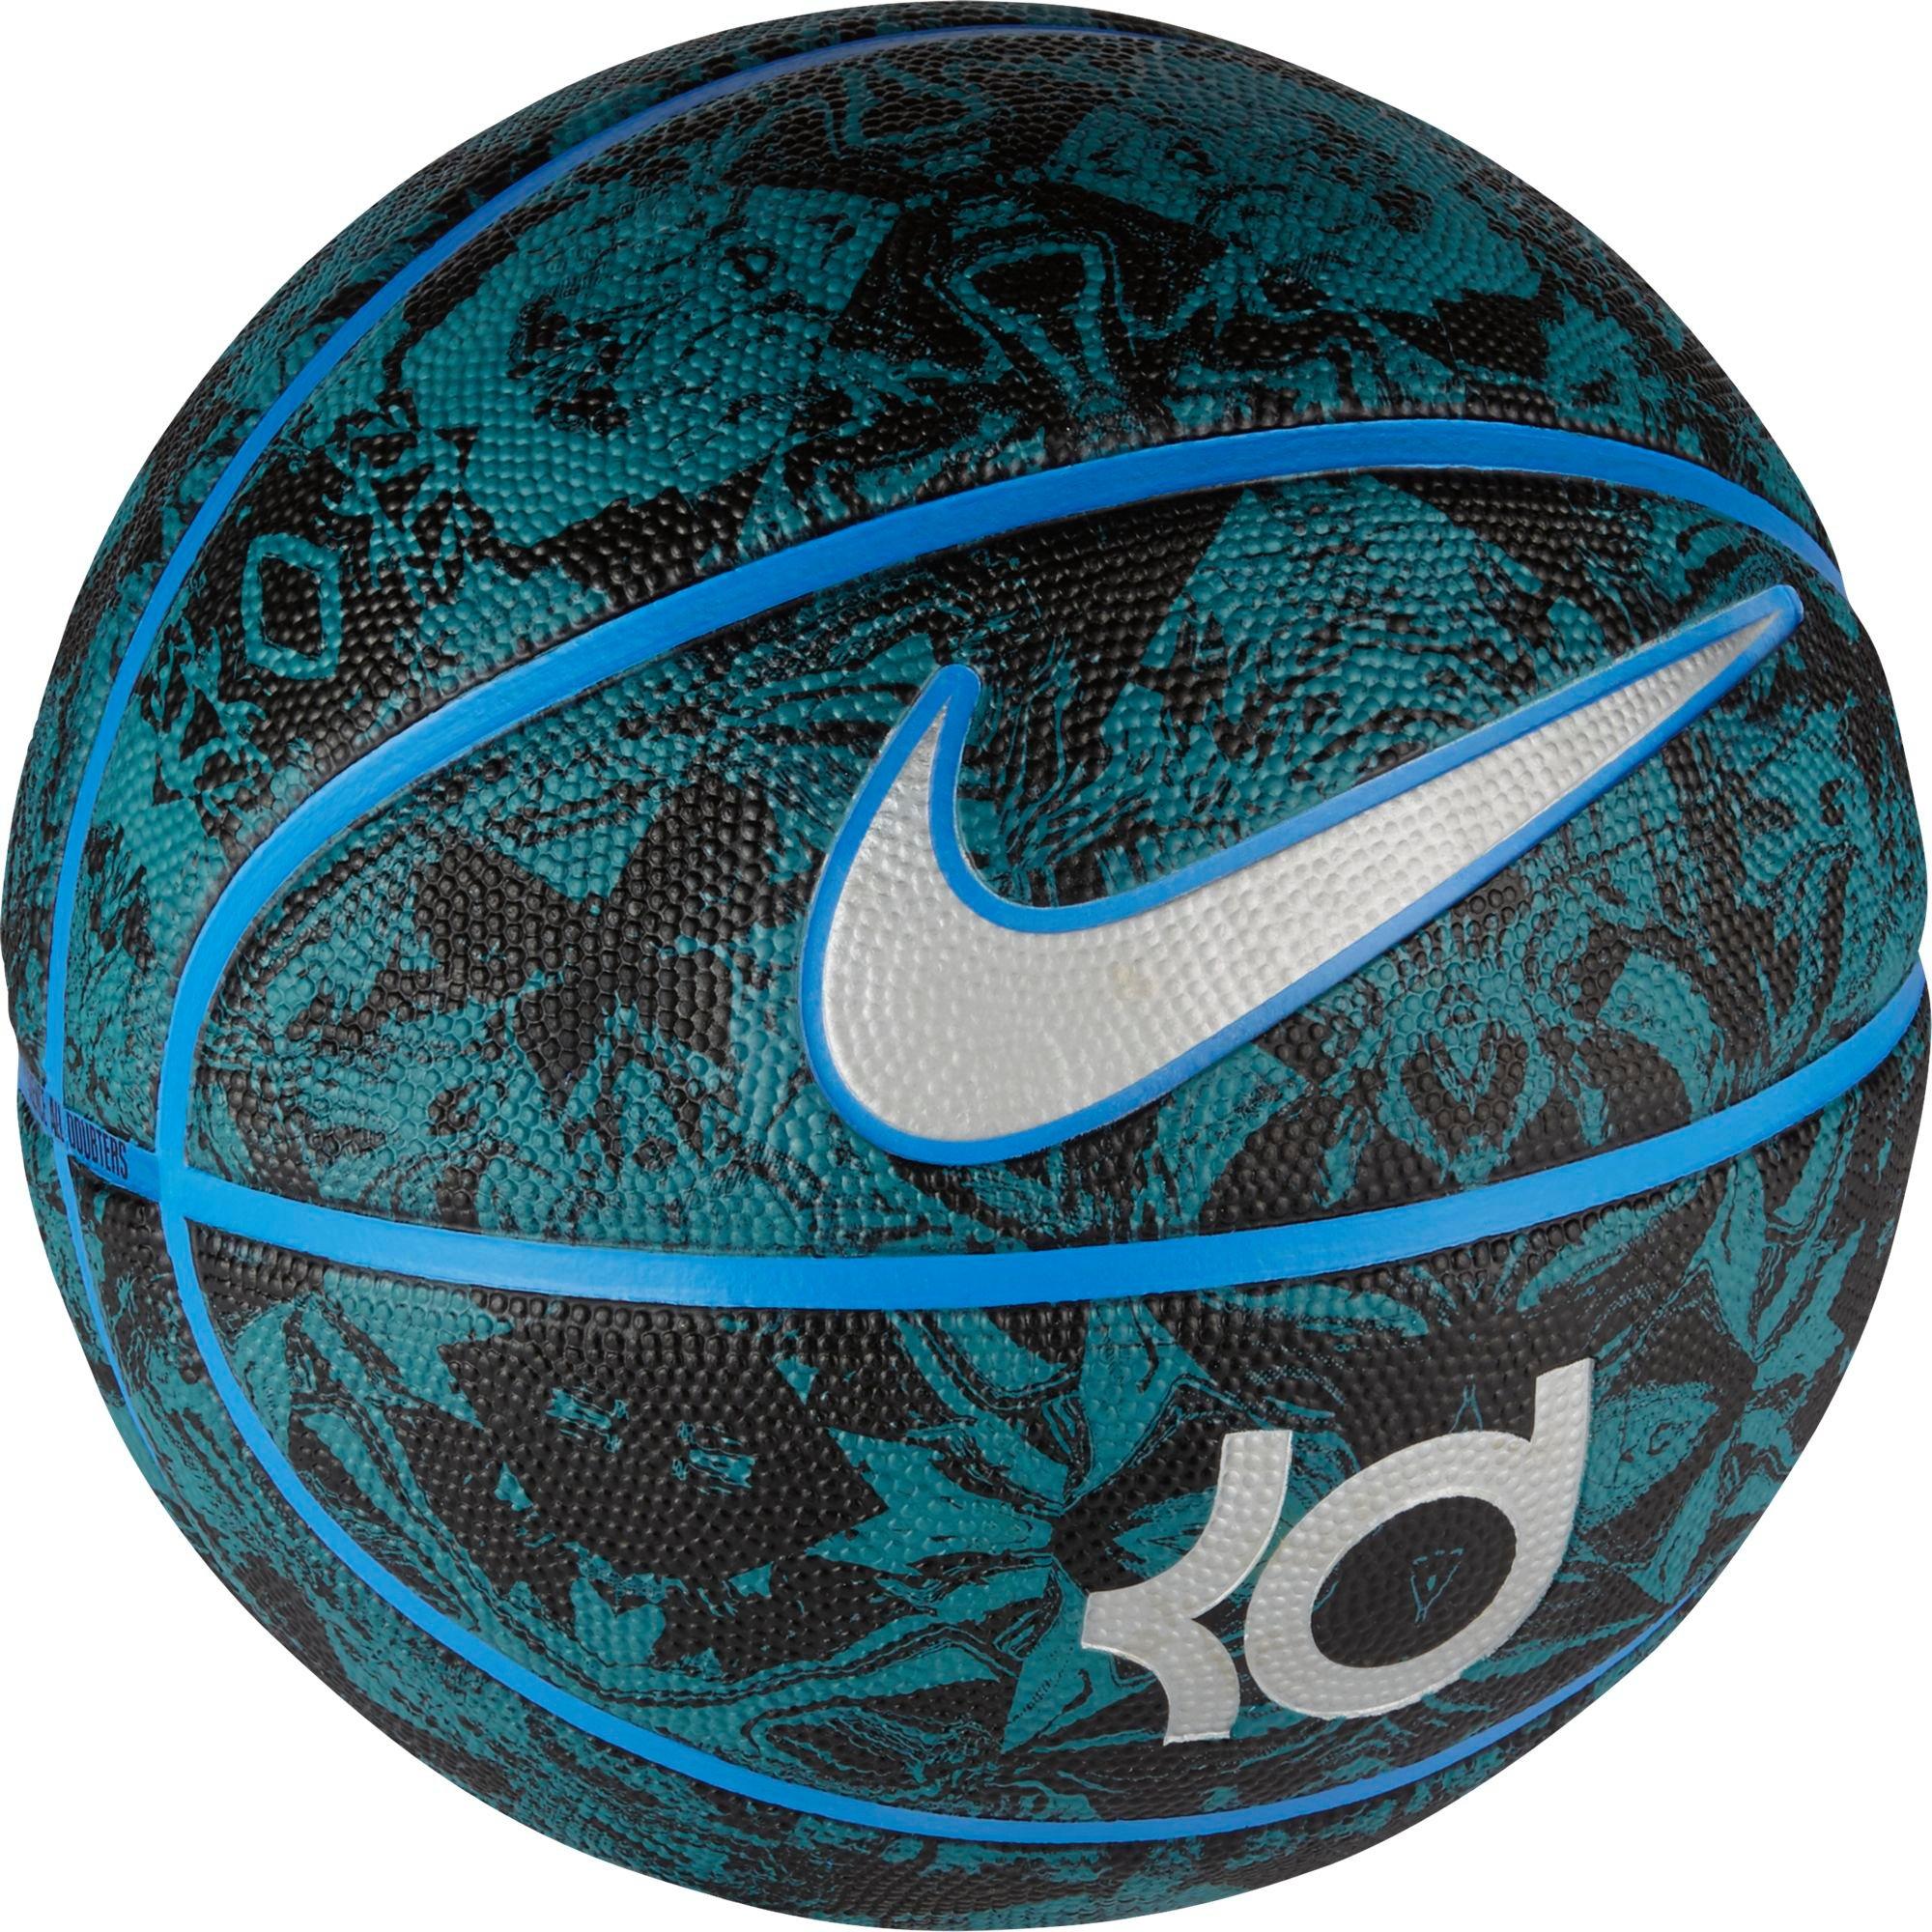 nike kd playground official basketball